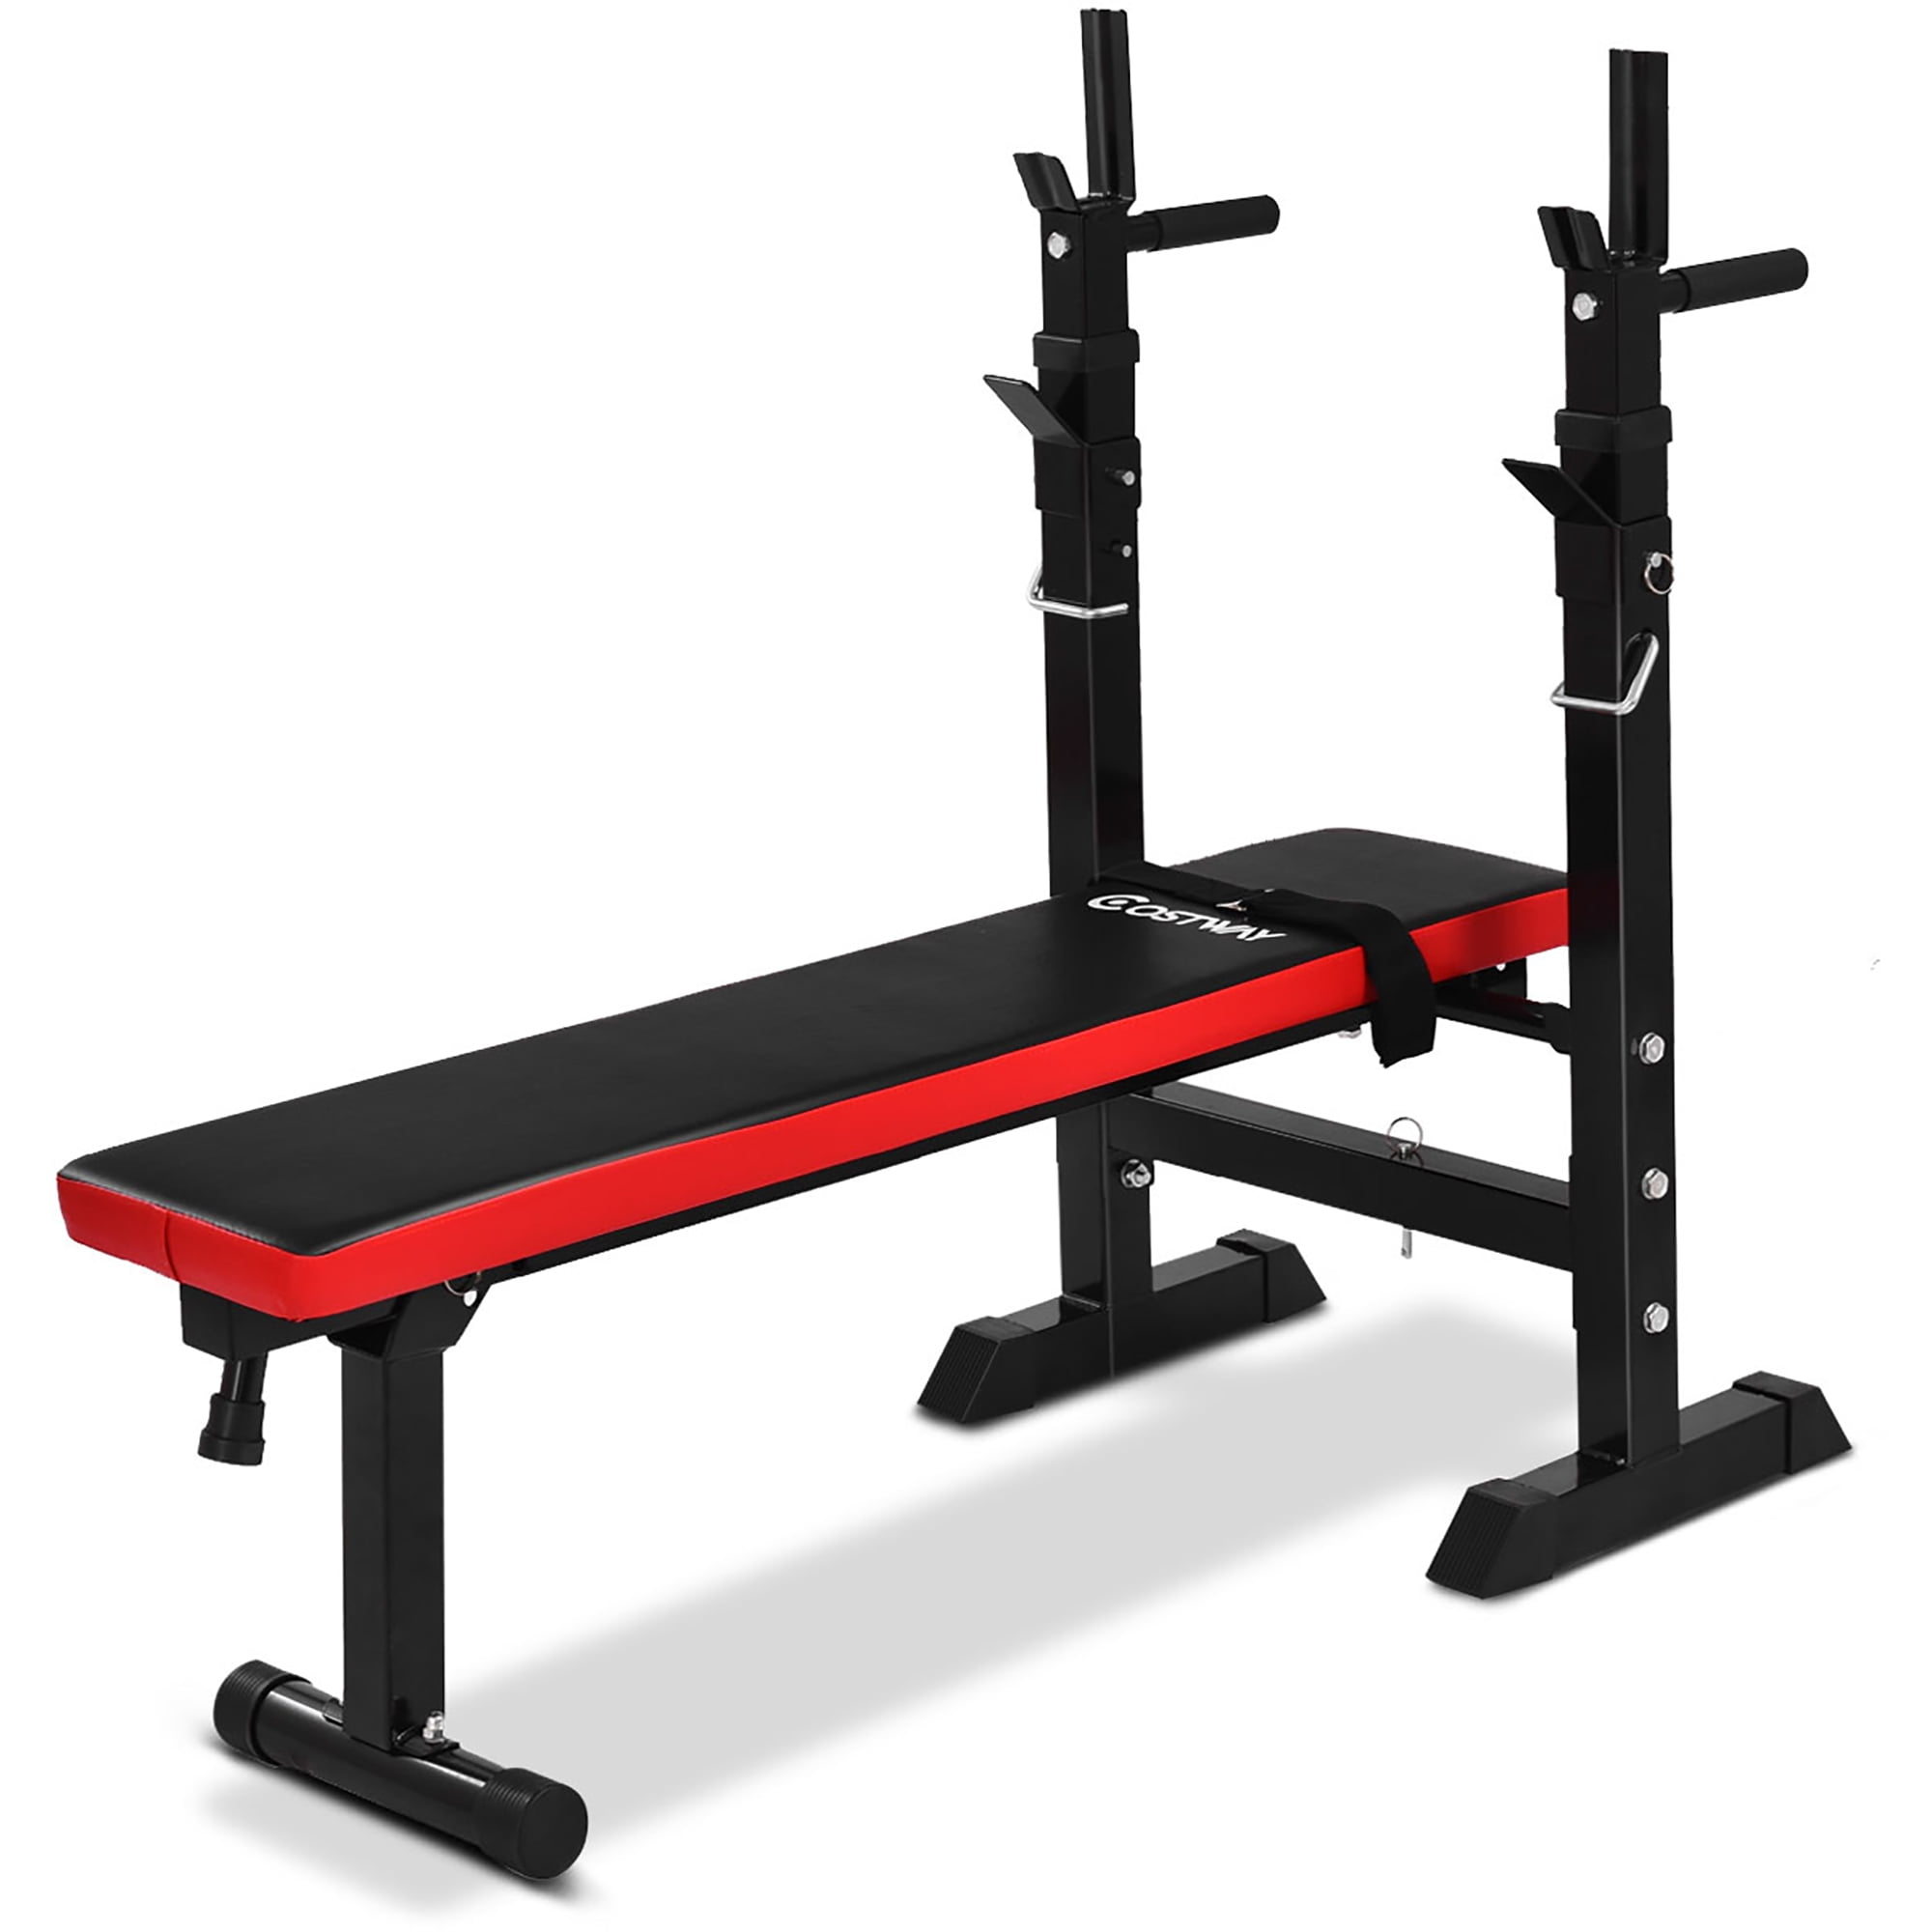 Adjustable Folding Weight Lifting Flat Incline Bench Fitness Safety Workout 